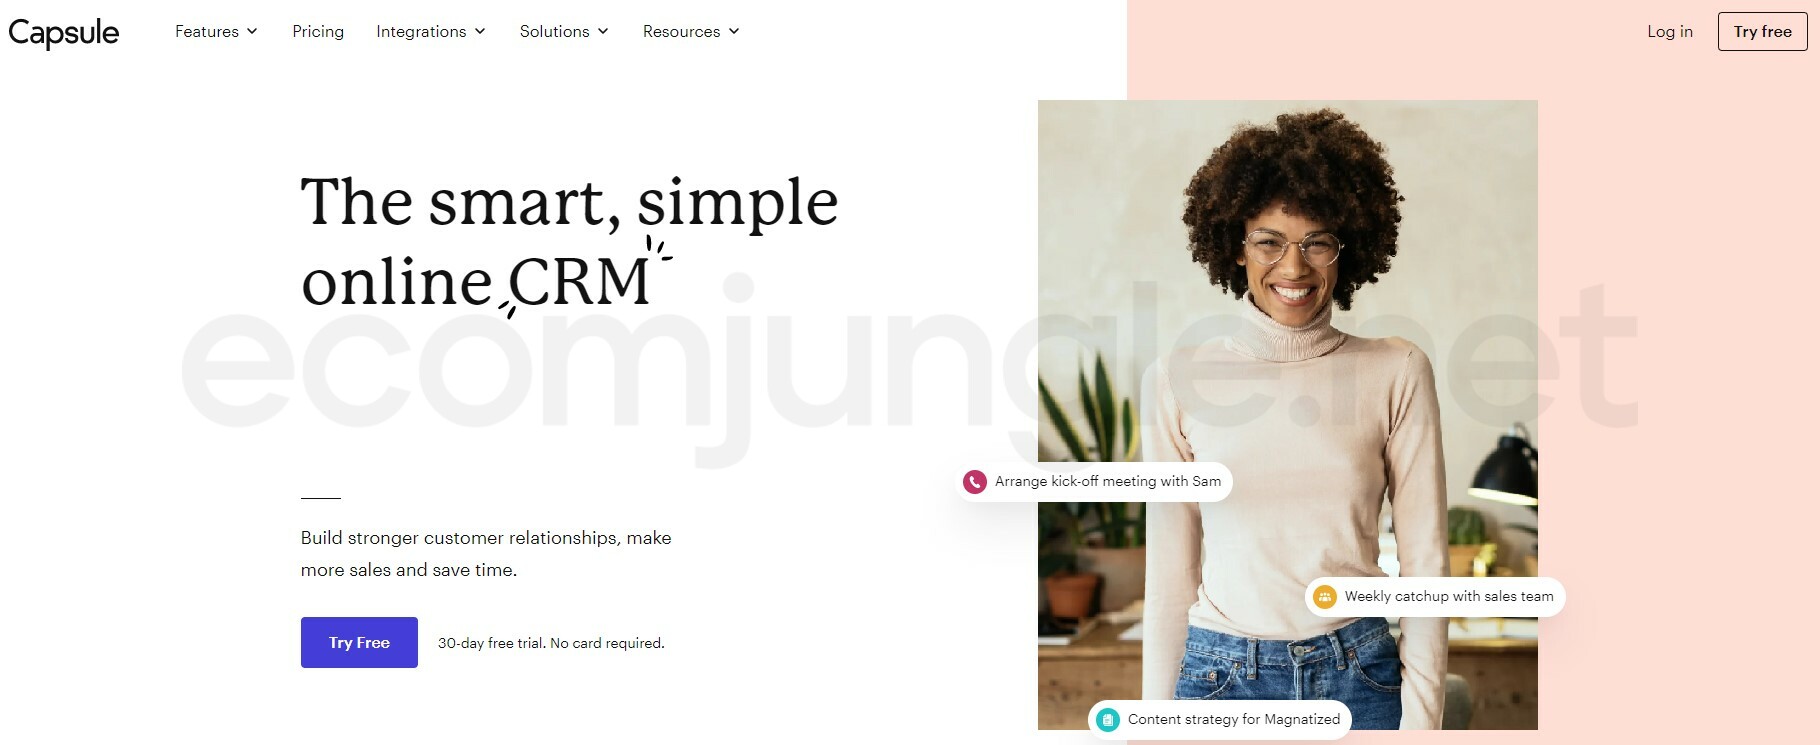 Capsule CRM for freelancers gives you a direct approach to relationship building.